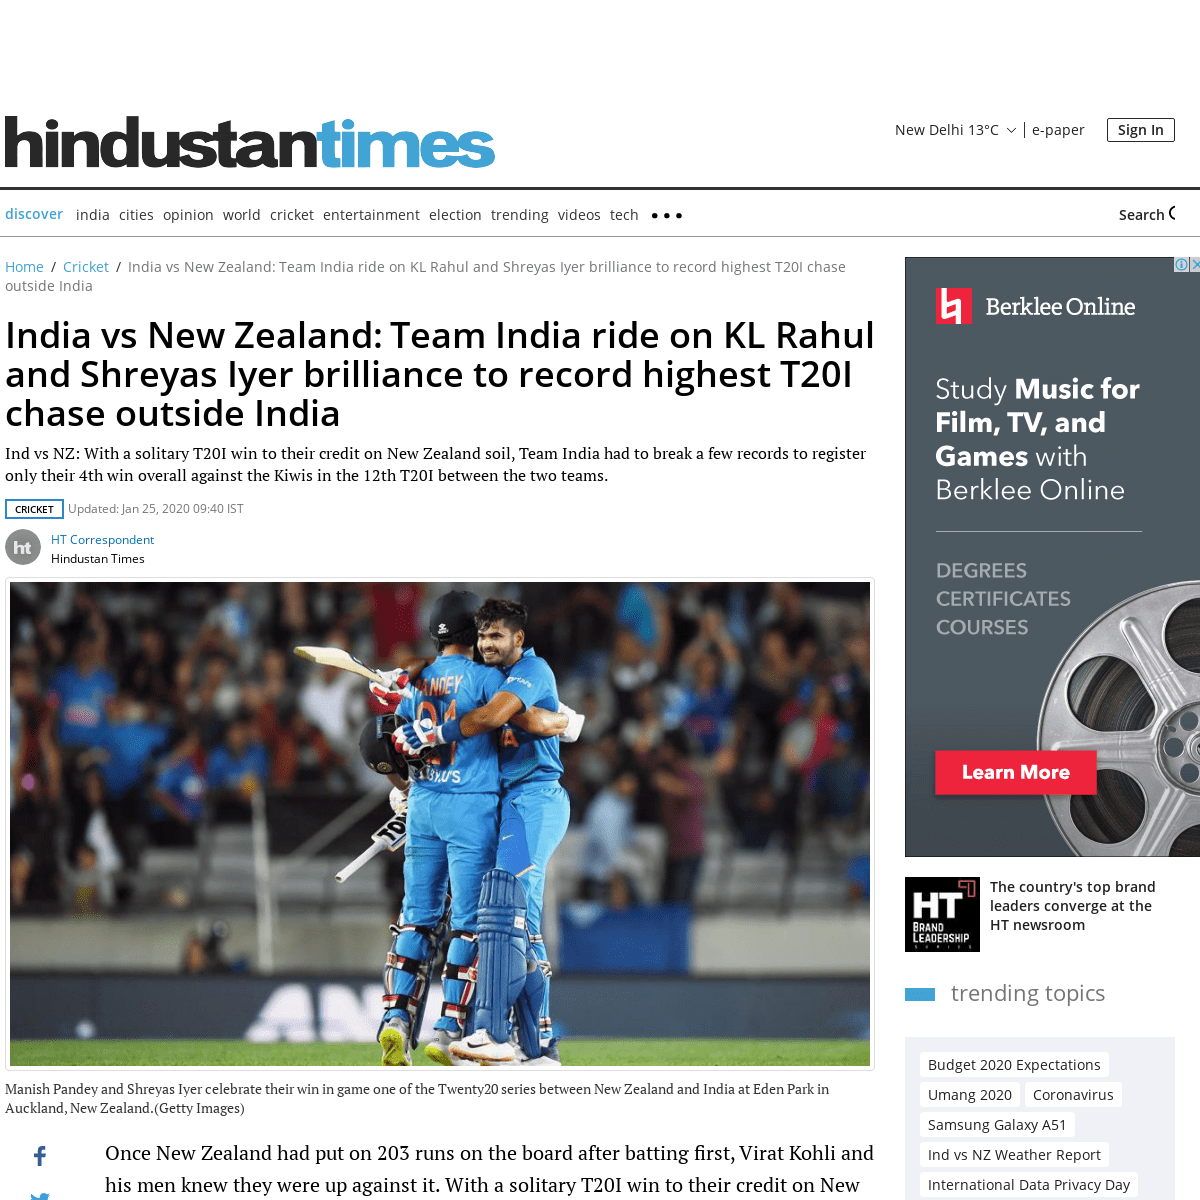 A complete backup of www.hindustantimes.com/cricket/india-vs-new-zealand-team-india-ride-on-kl-rahul-and-shreyas-iyer-brilliance